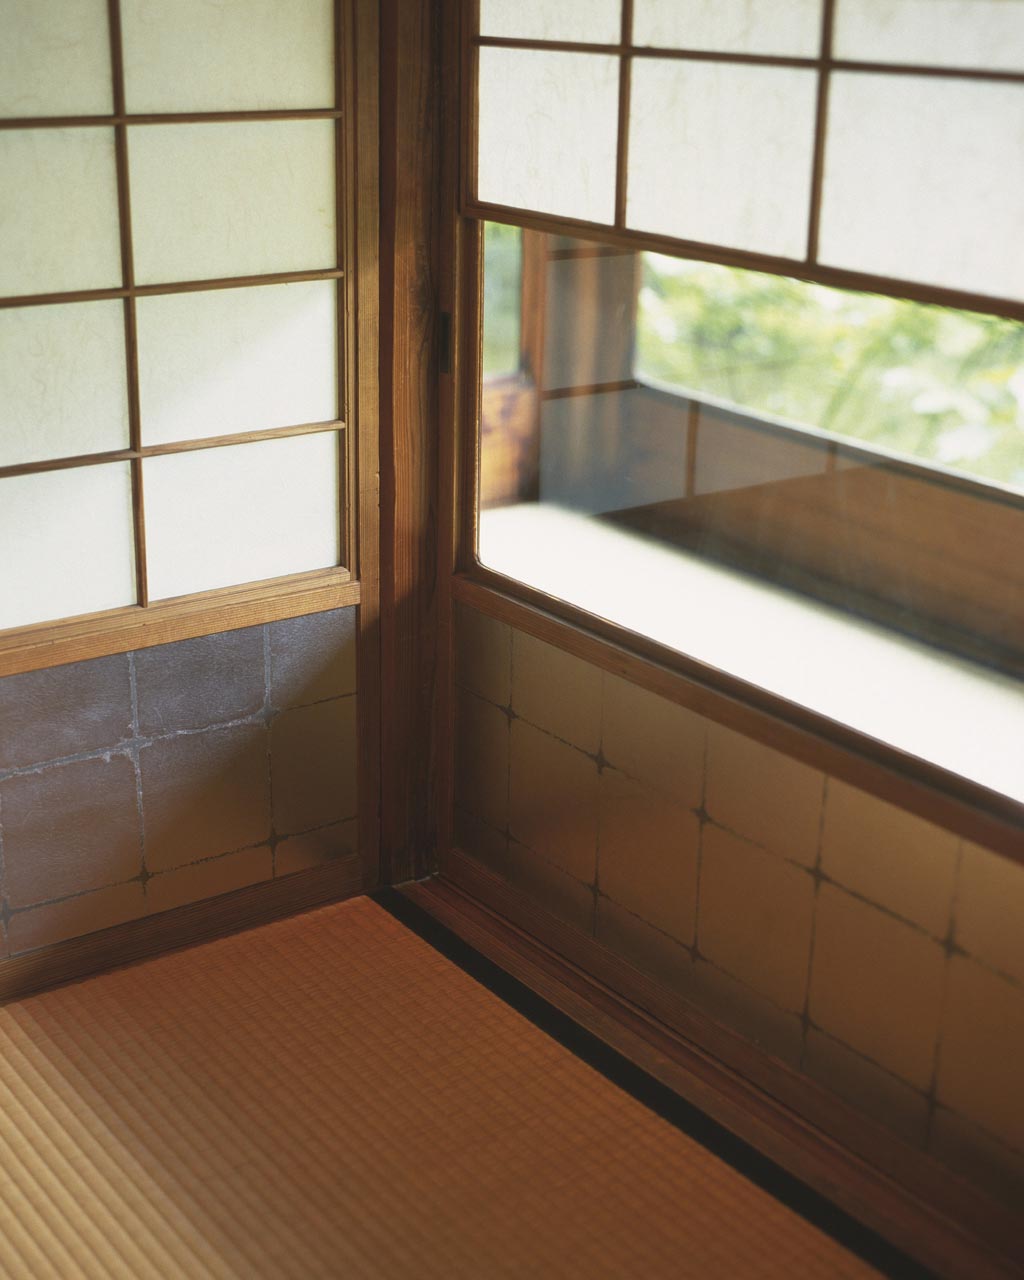 Asian paper window shades